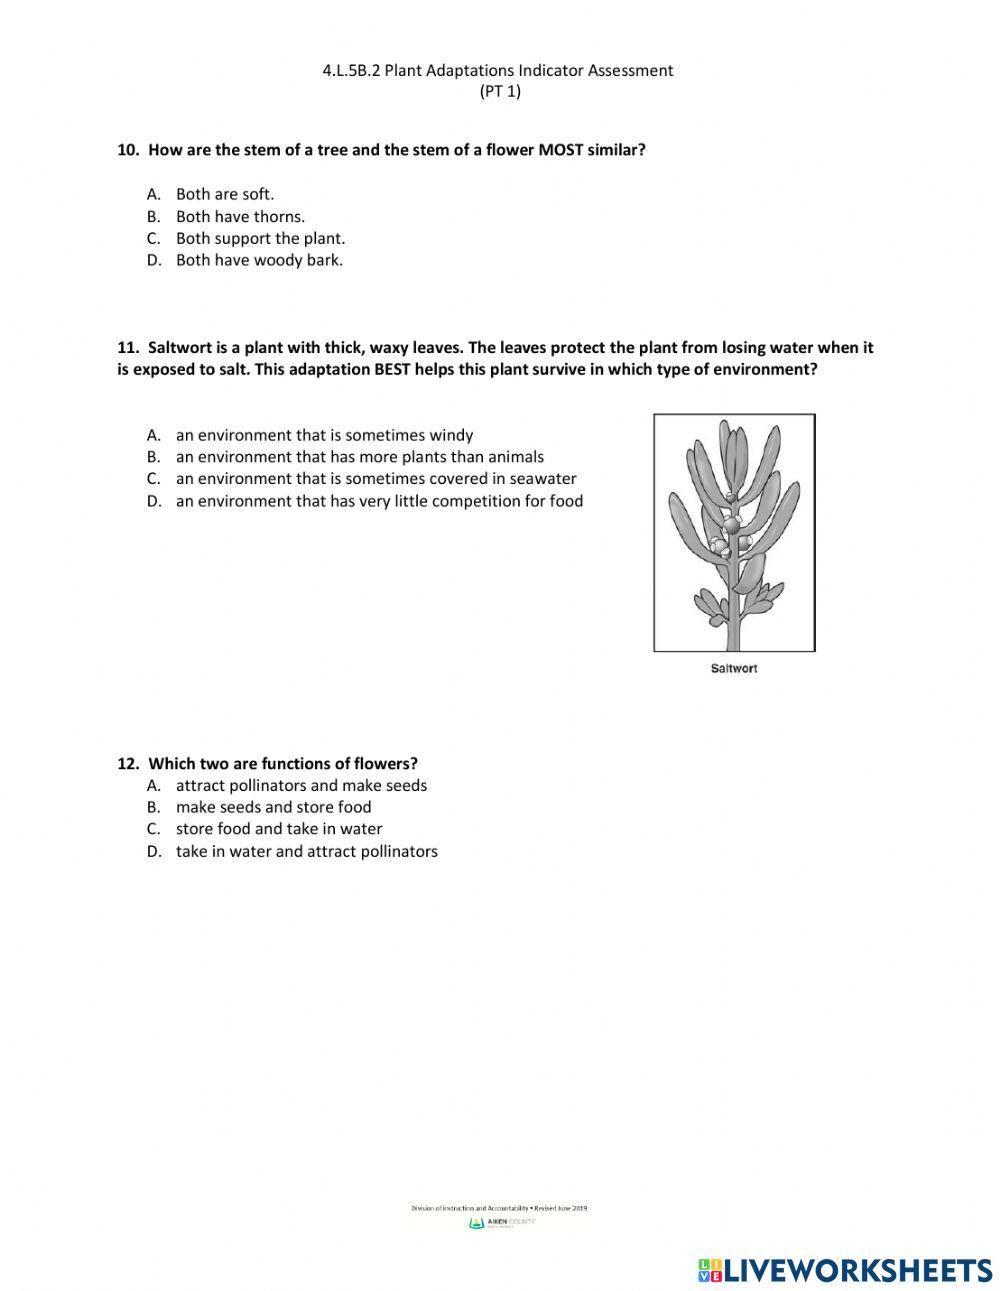 Plant Structures-Adaptations Indicator Assessment Part 1